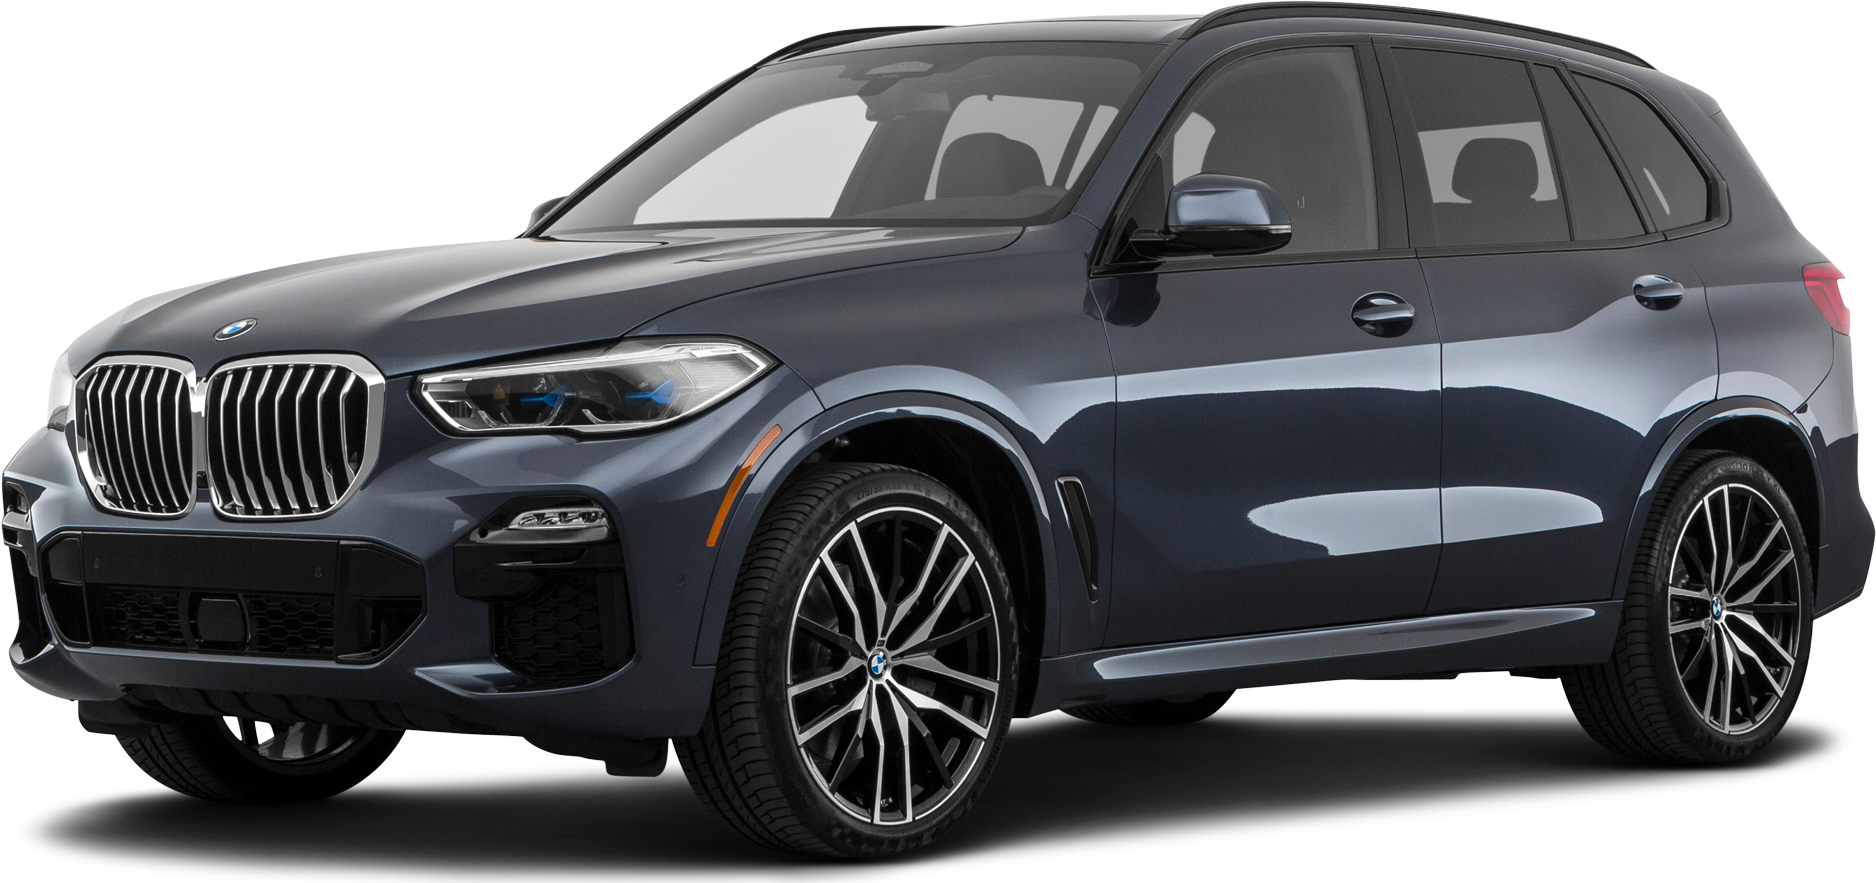 2019 BMW X5 Values & Cars for Sale | Kelley Blue Book